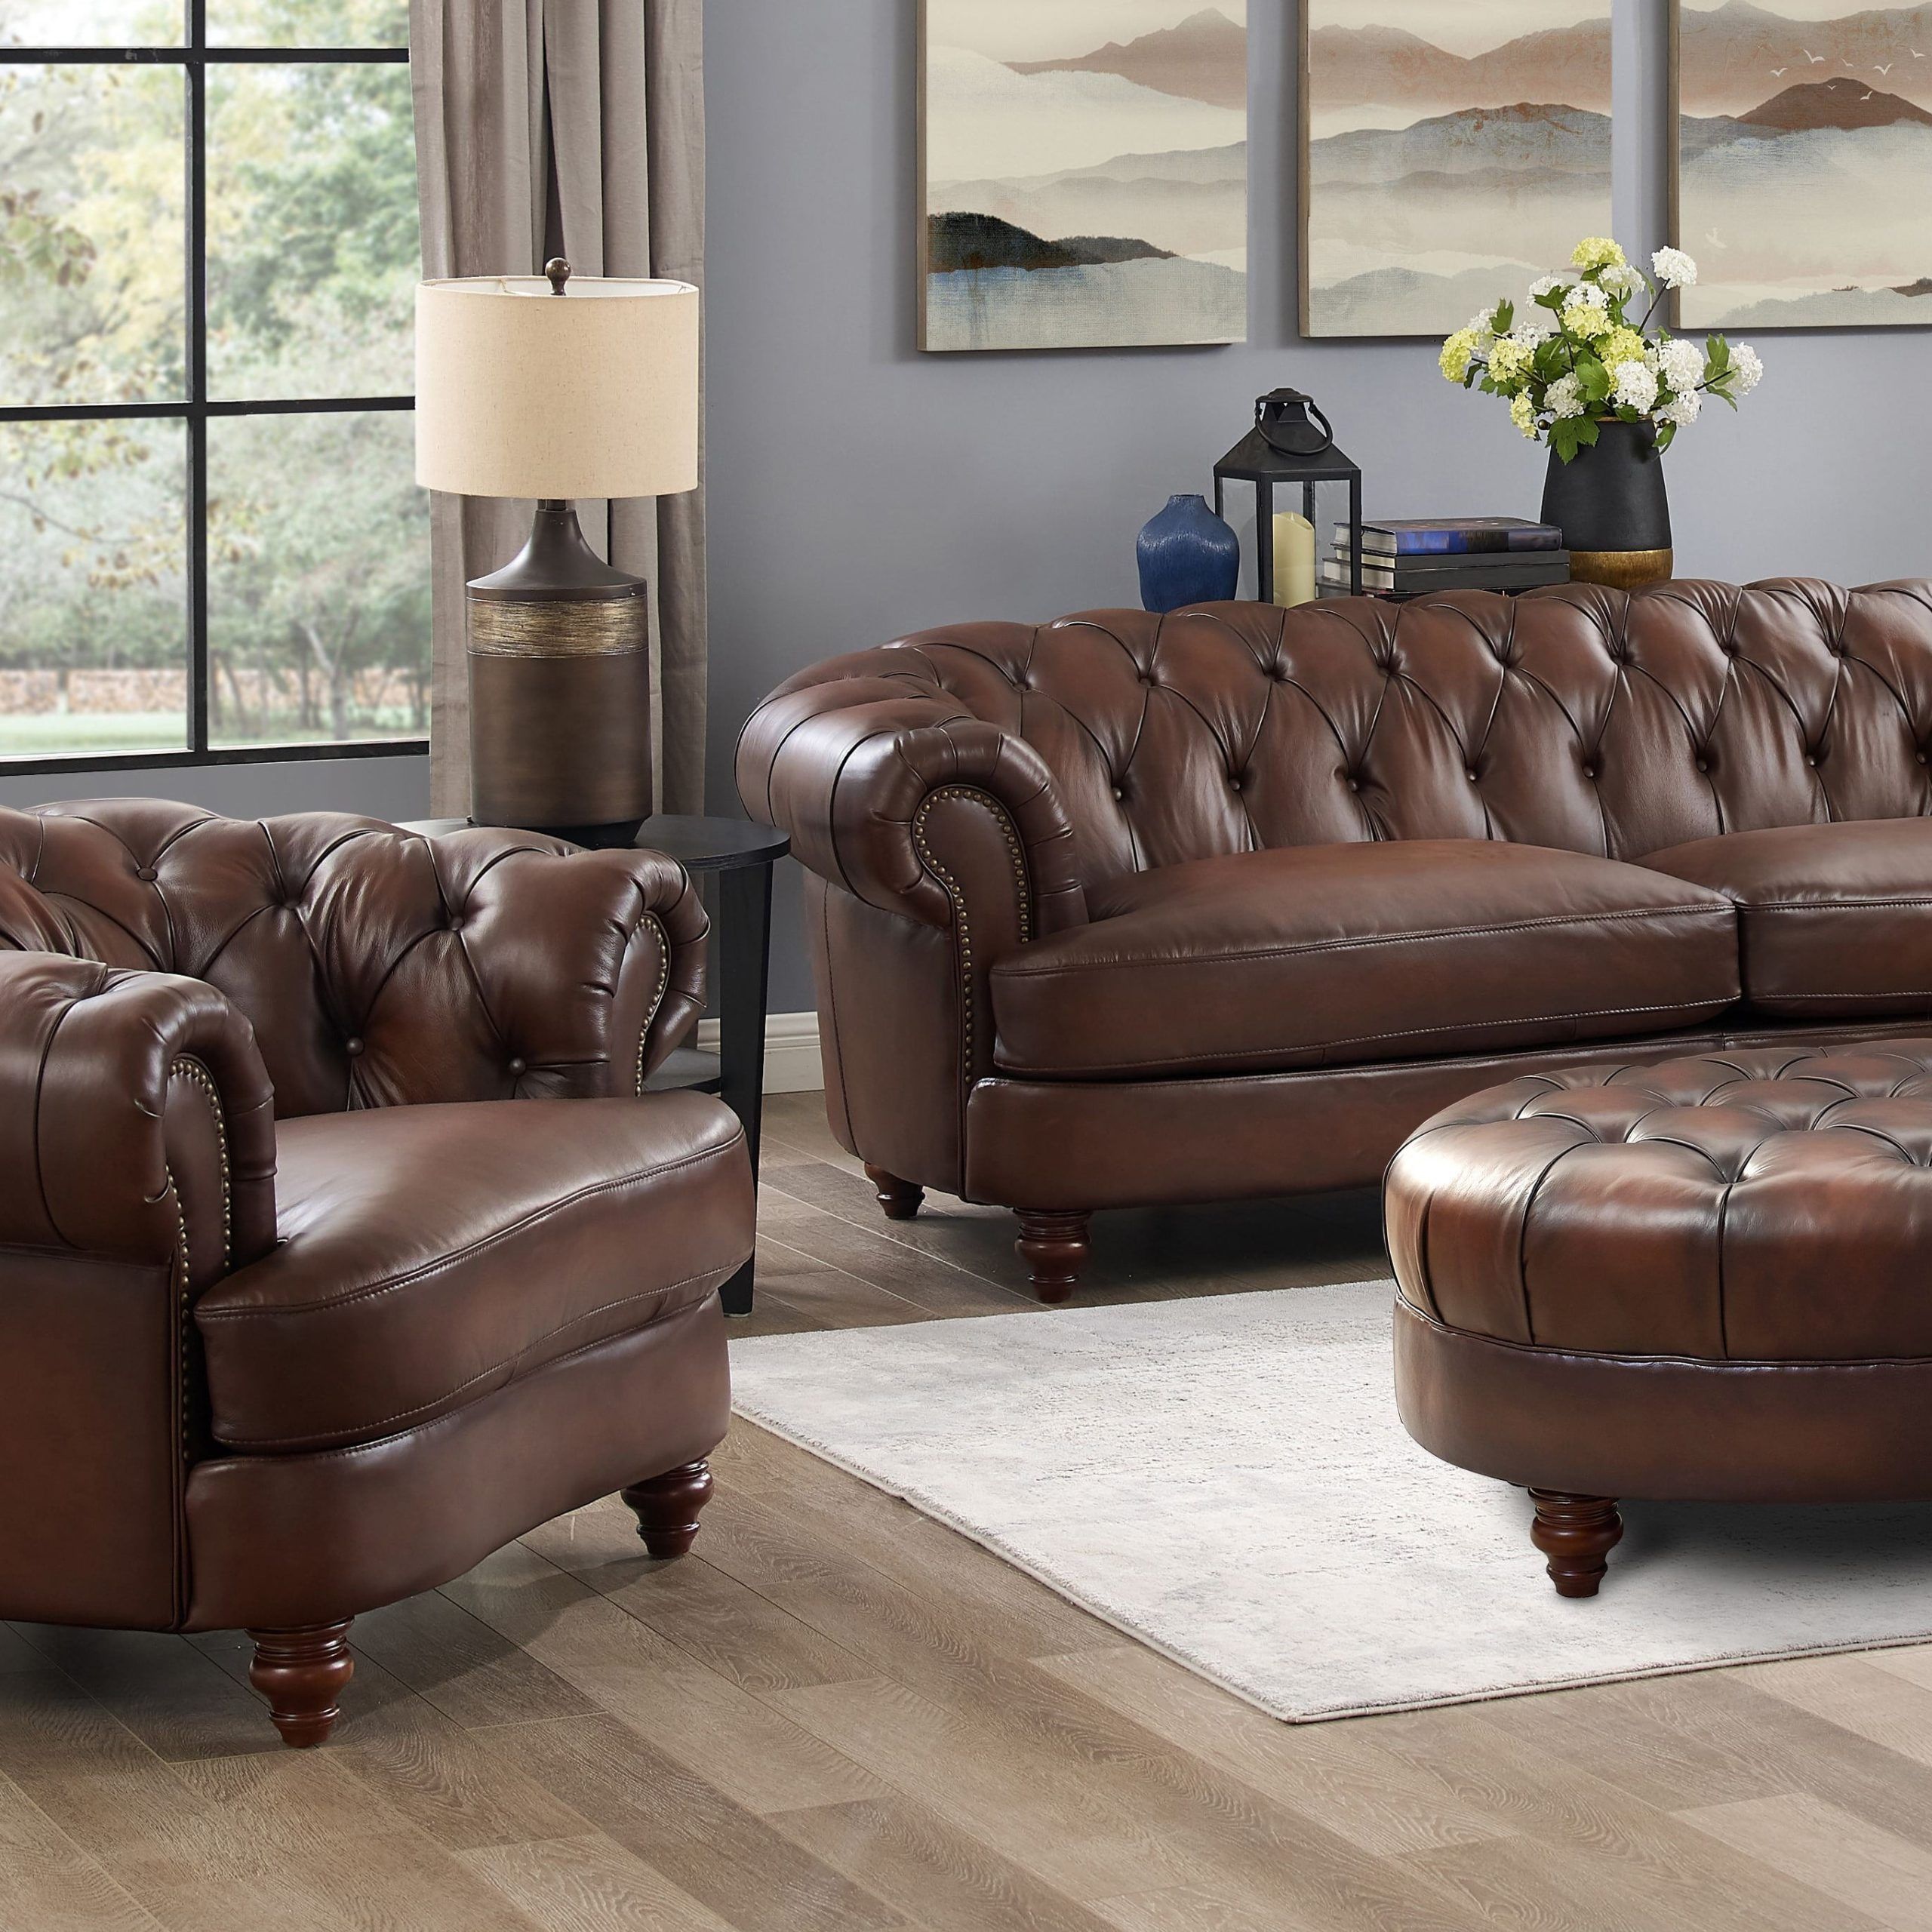 Hydeline Newport 100% Leather Chesterfield Sofa, Chair And Ottoman Set Intended For Sofas With Ottomans In Brown (Gallery 1 of 20)